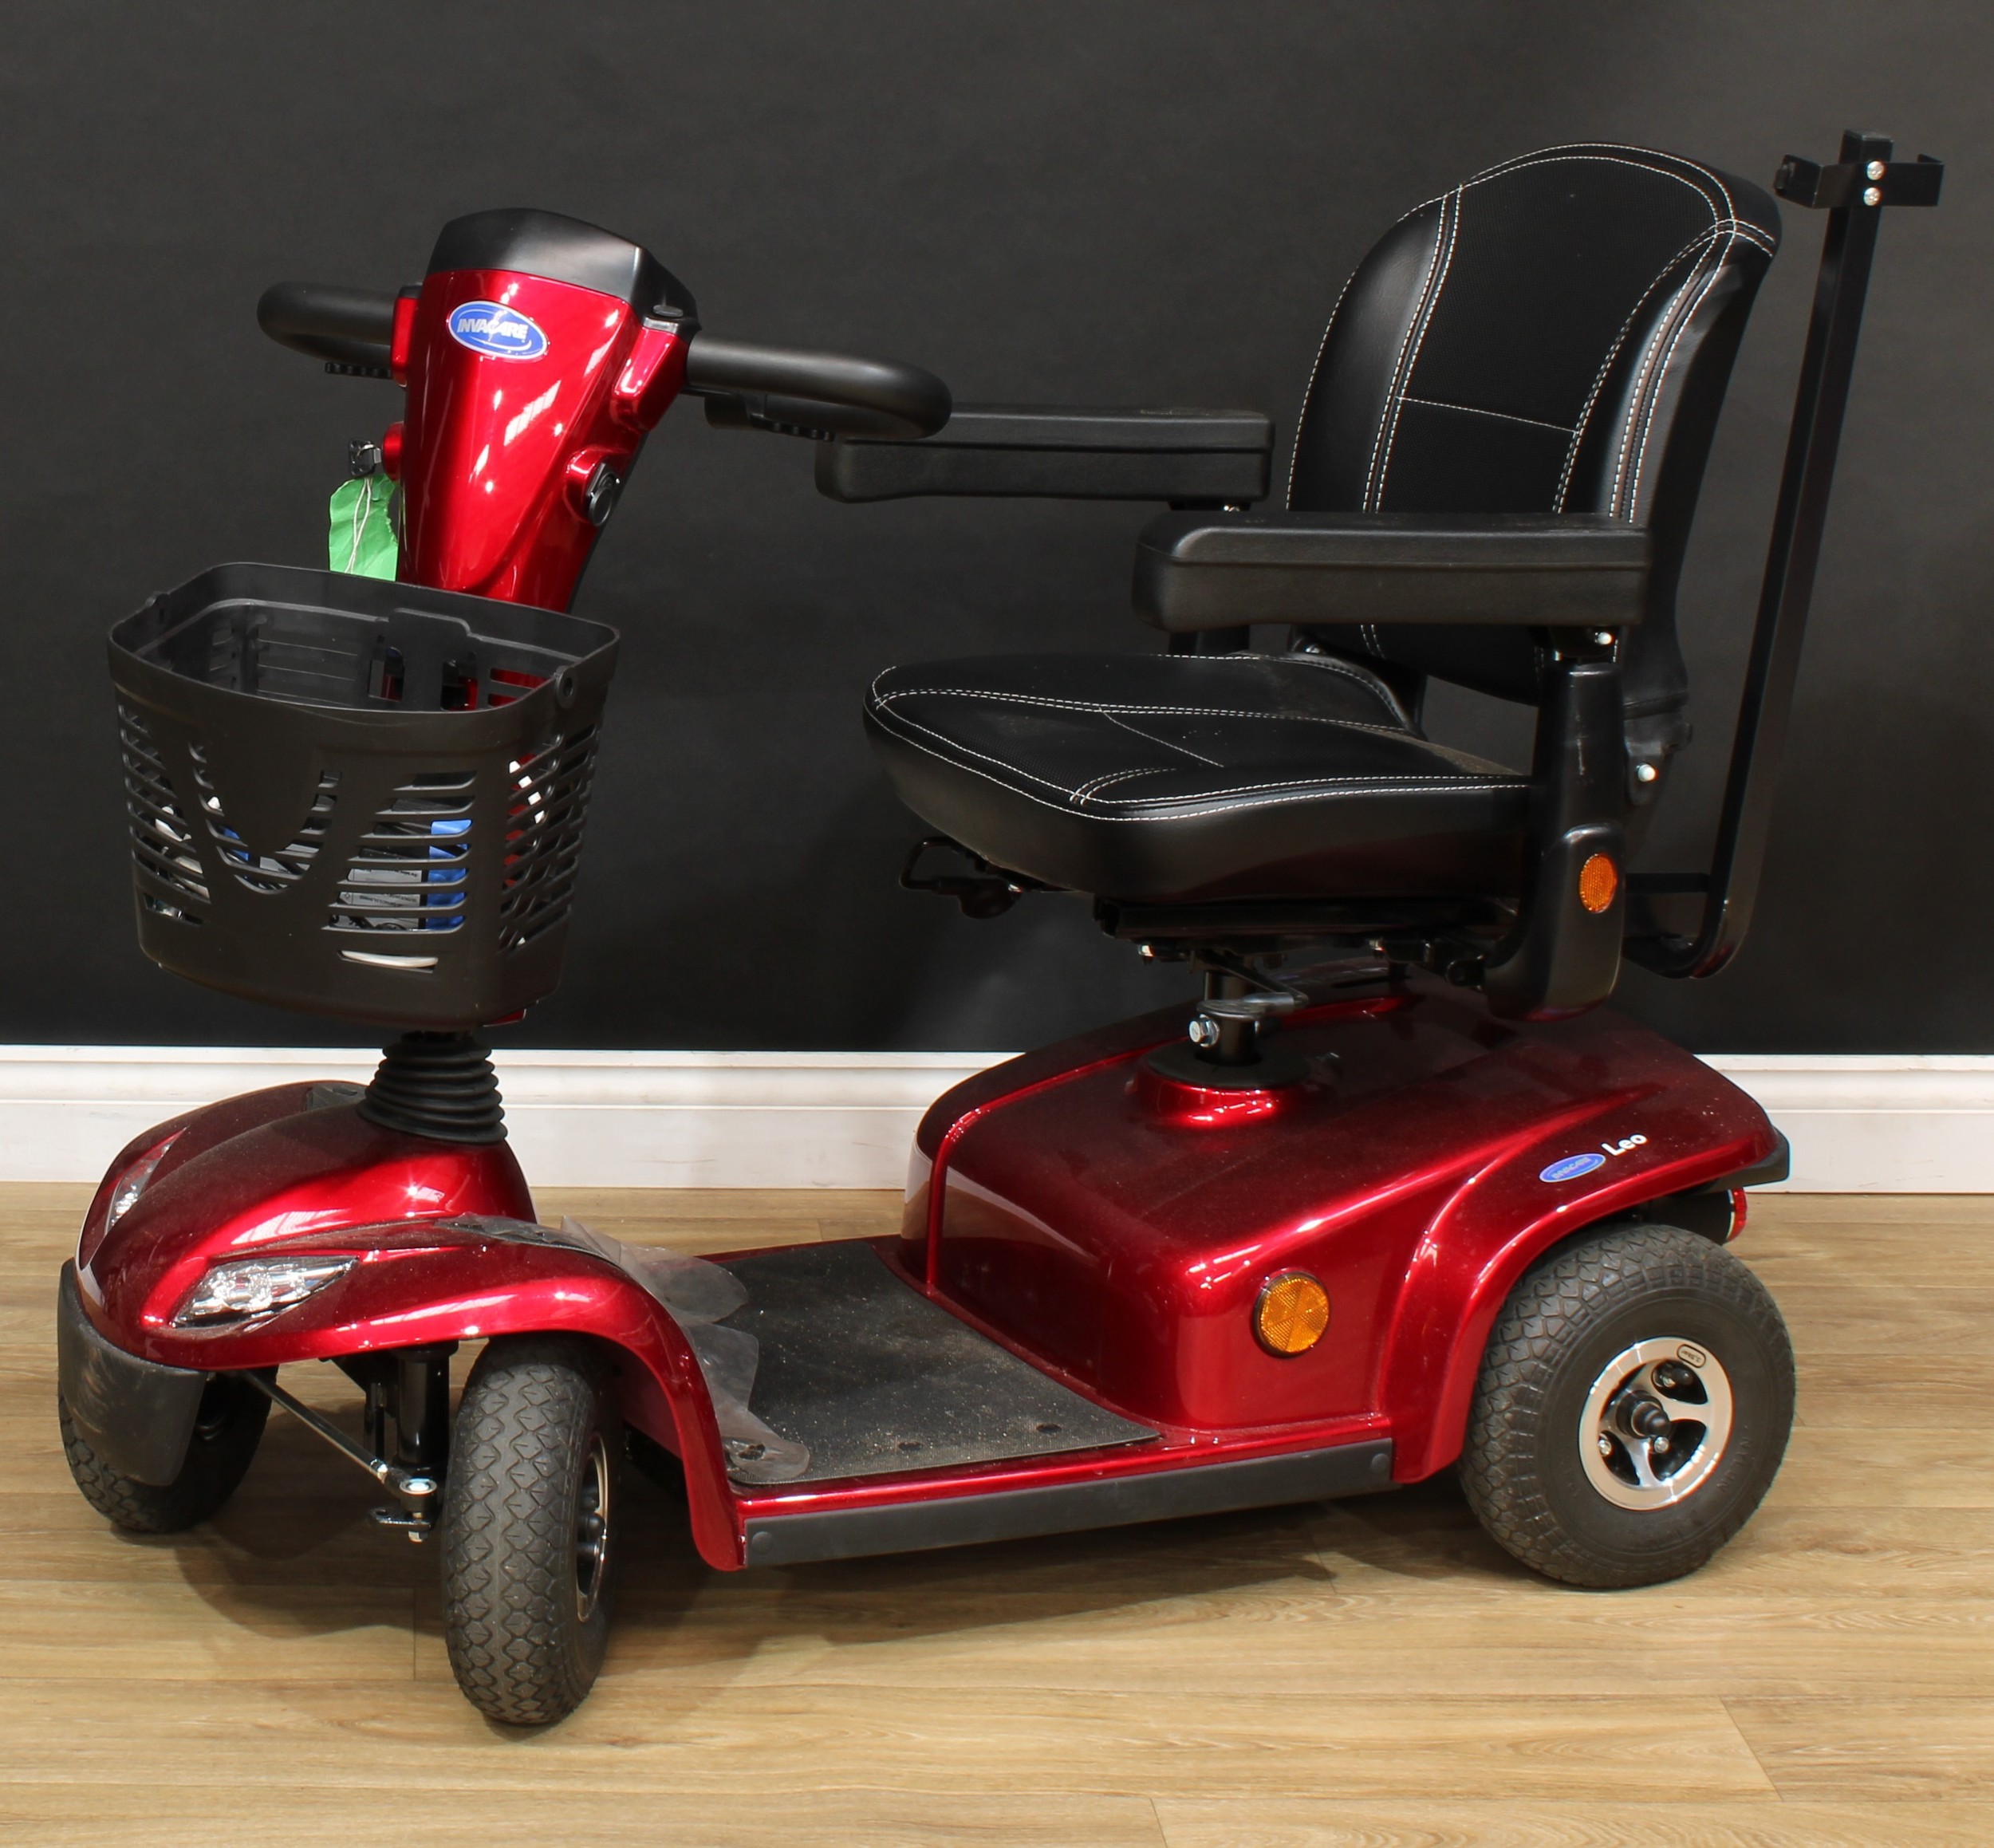 An Invacare Leo mobility scooter - Image 2 of 2